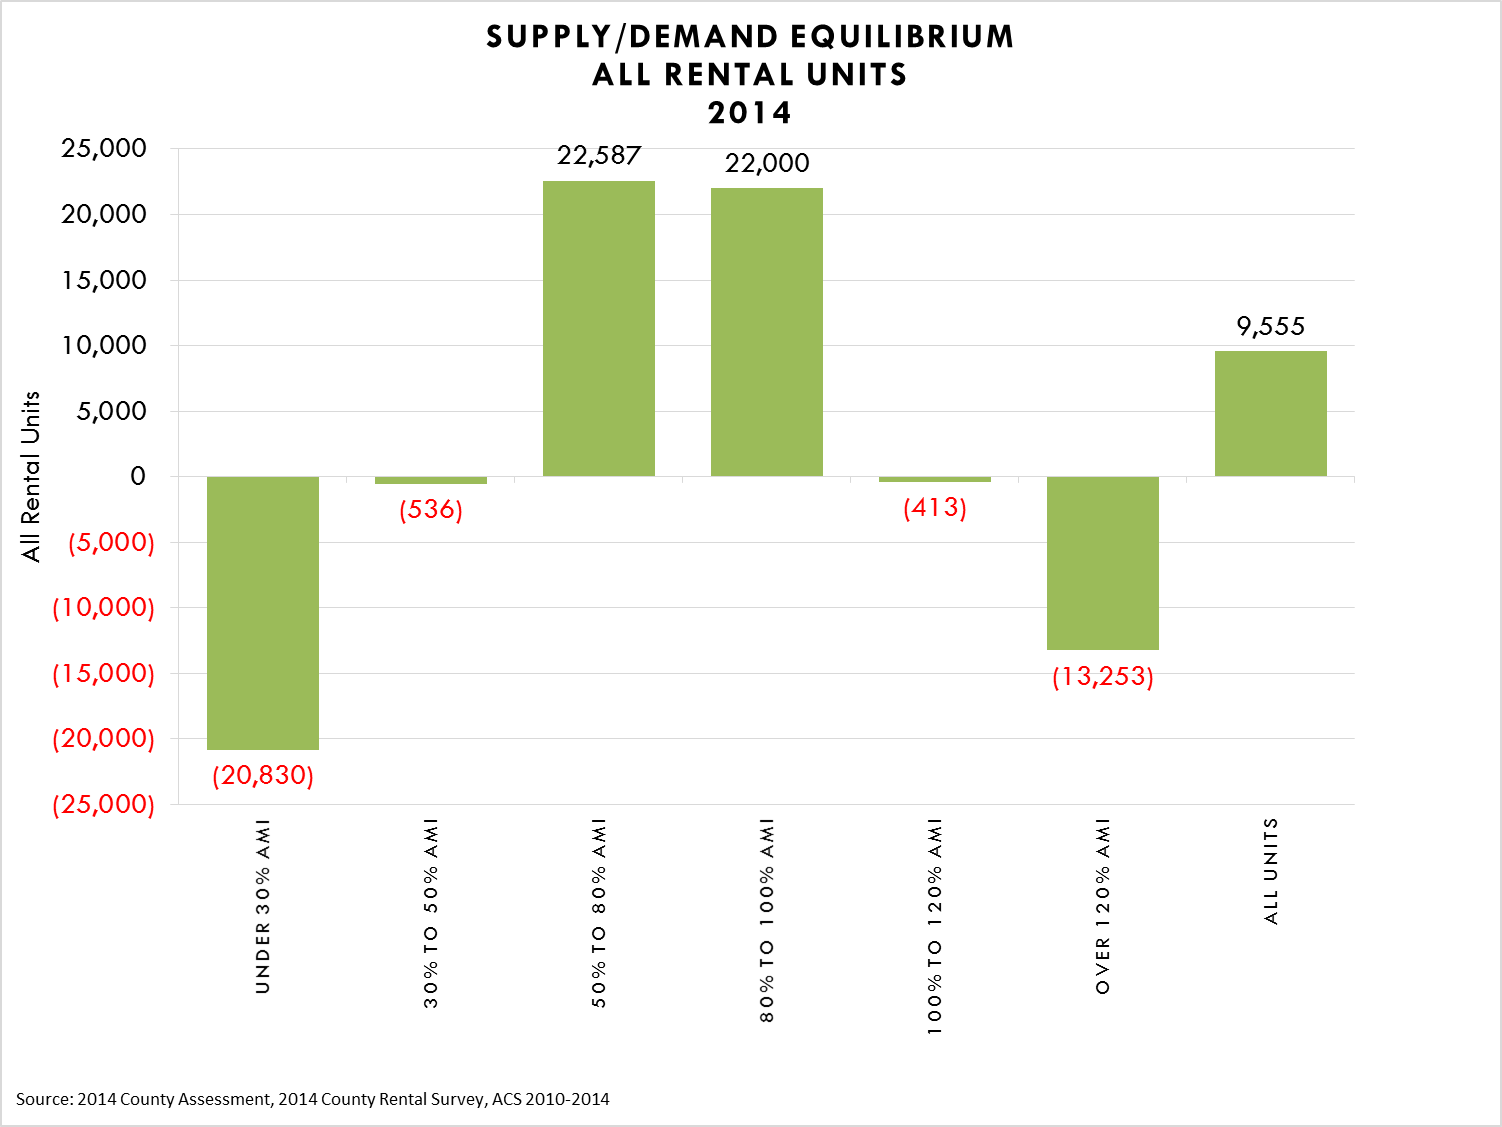 Supply/Demand Equilibrium for All Rental Units